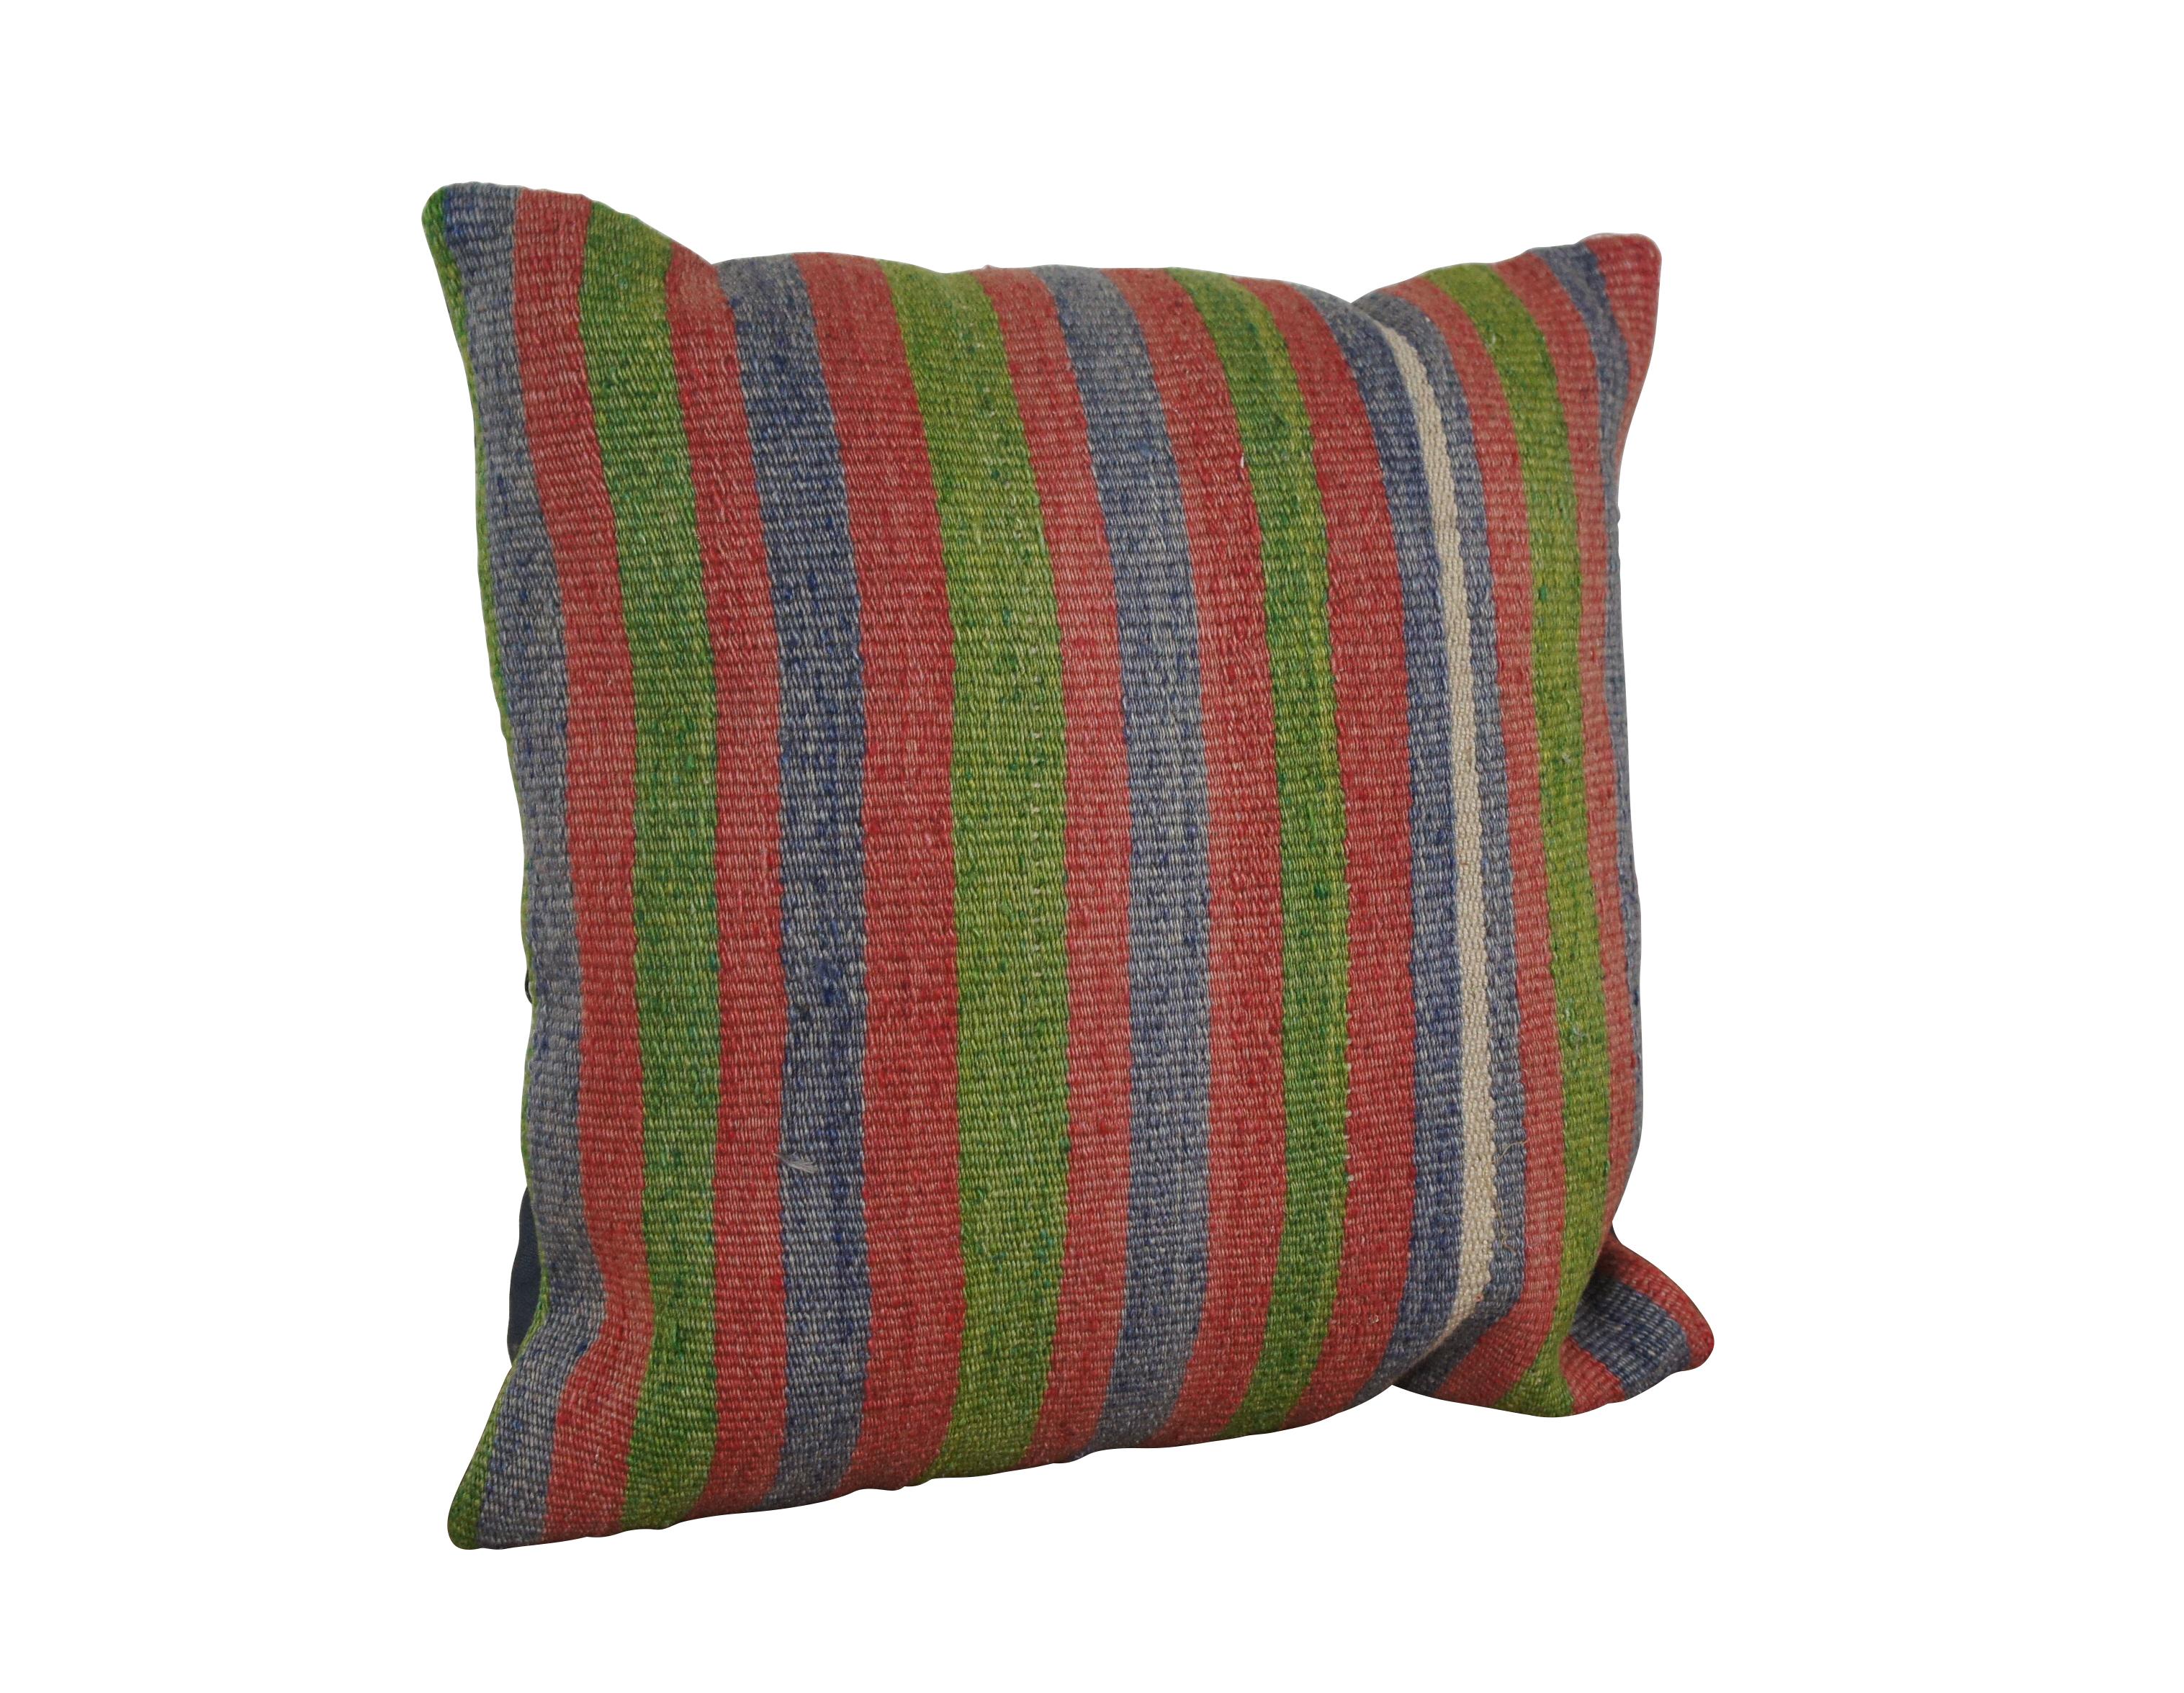 20th century Oldkilim square throw pillow, hand woven in wool with a pattern of green, blue, pink and white stripes. Black cotton back with zipper closure. Fiber filled. Made in Turkey.

Dimensions:
18